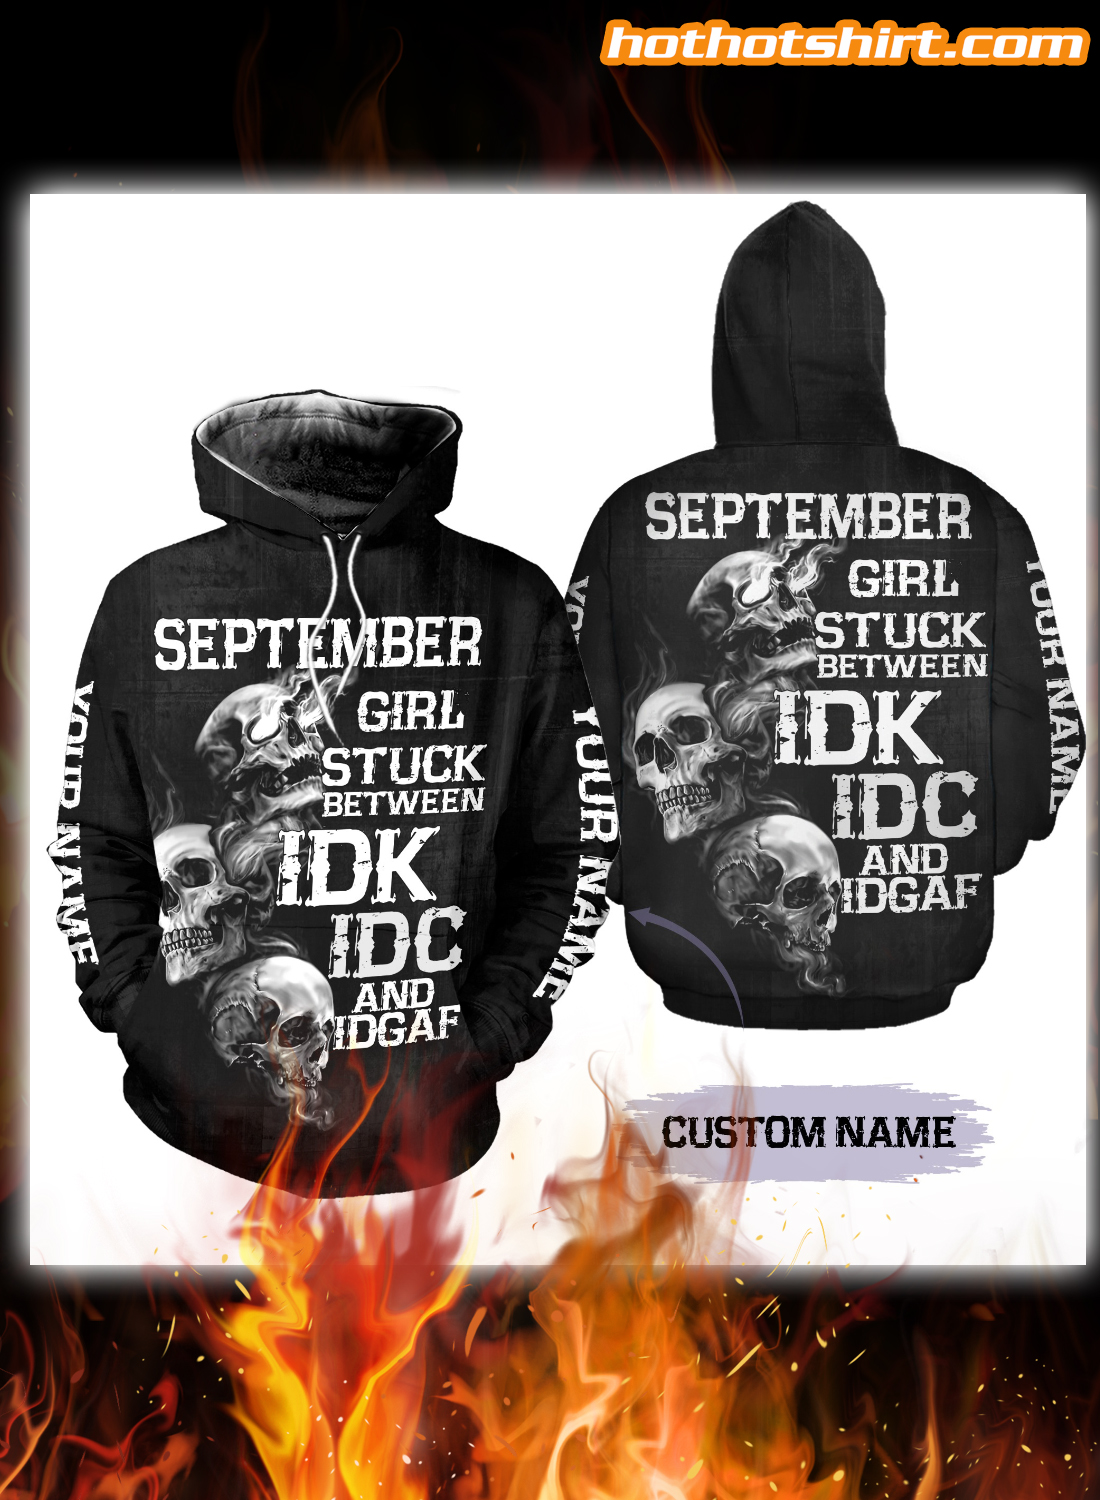 Personalized name september girl stuck between idk idc and idgaf 3D Hoodie and legging